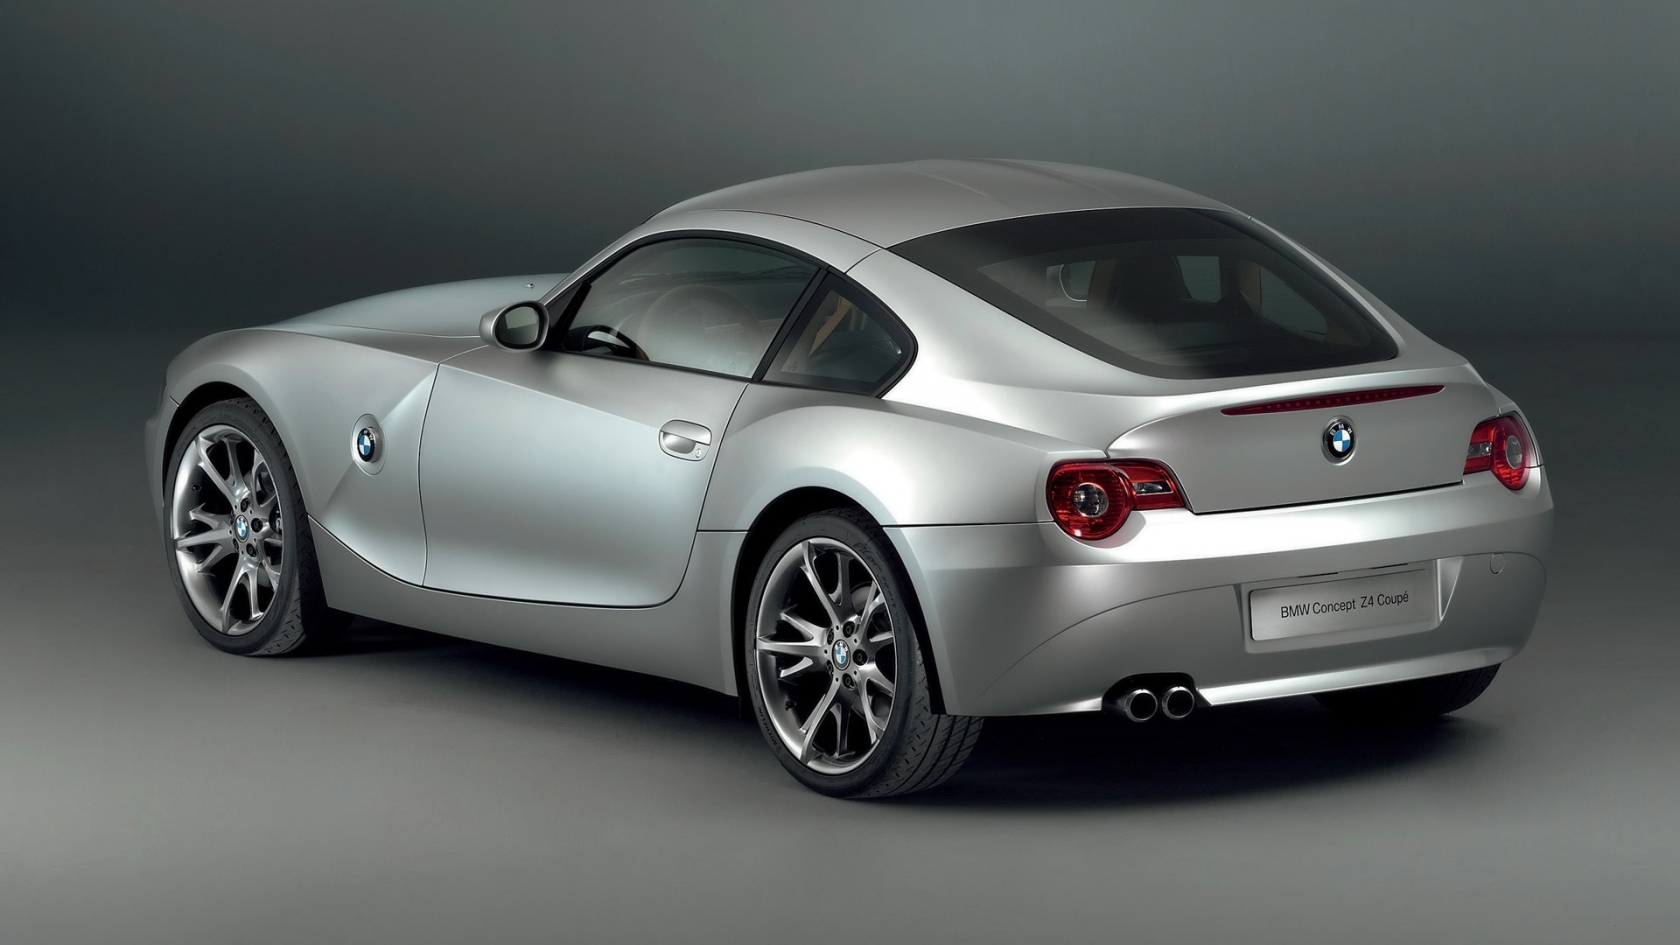 BMW Z4 Coupe Concept RA 2005 for 1680 x 945 HDTV resolution